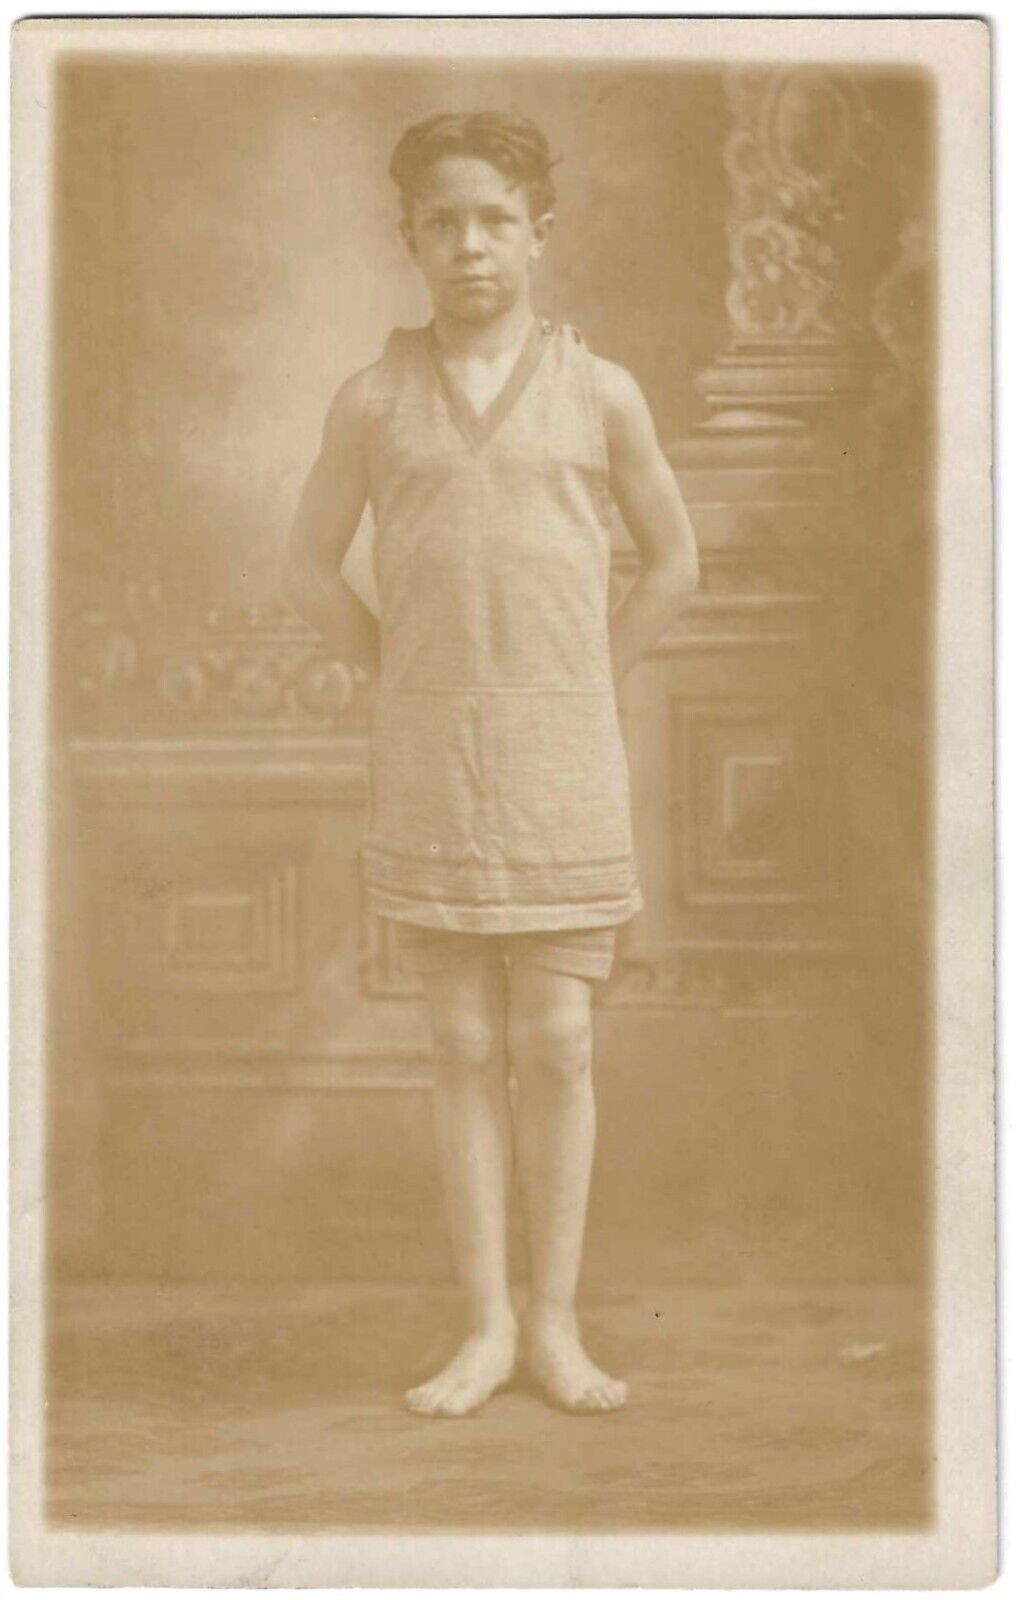 Vintage RPPC Young Boy Wearing Bathing Suit & Bare Feet Photo Postcard